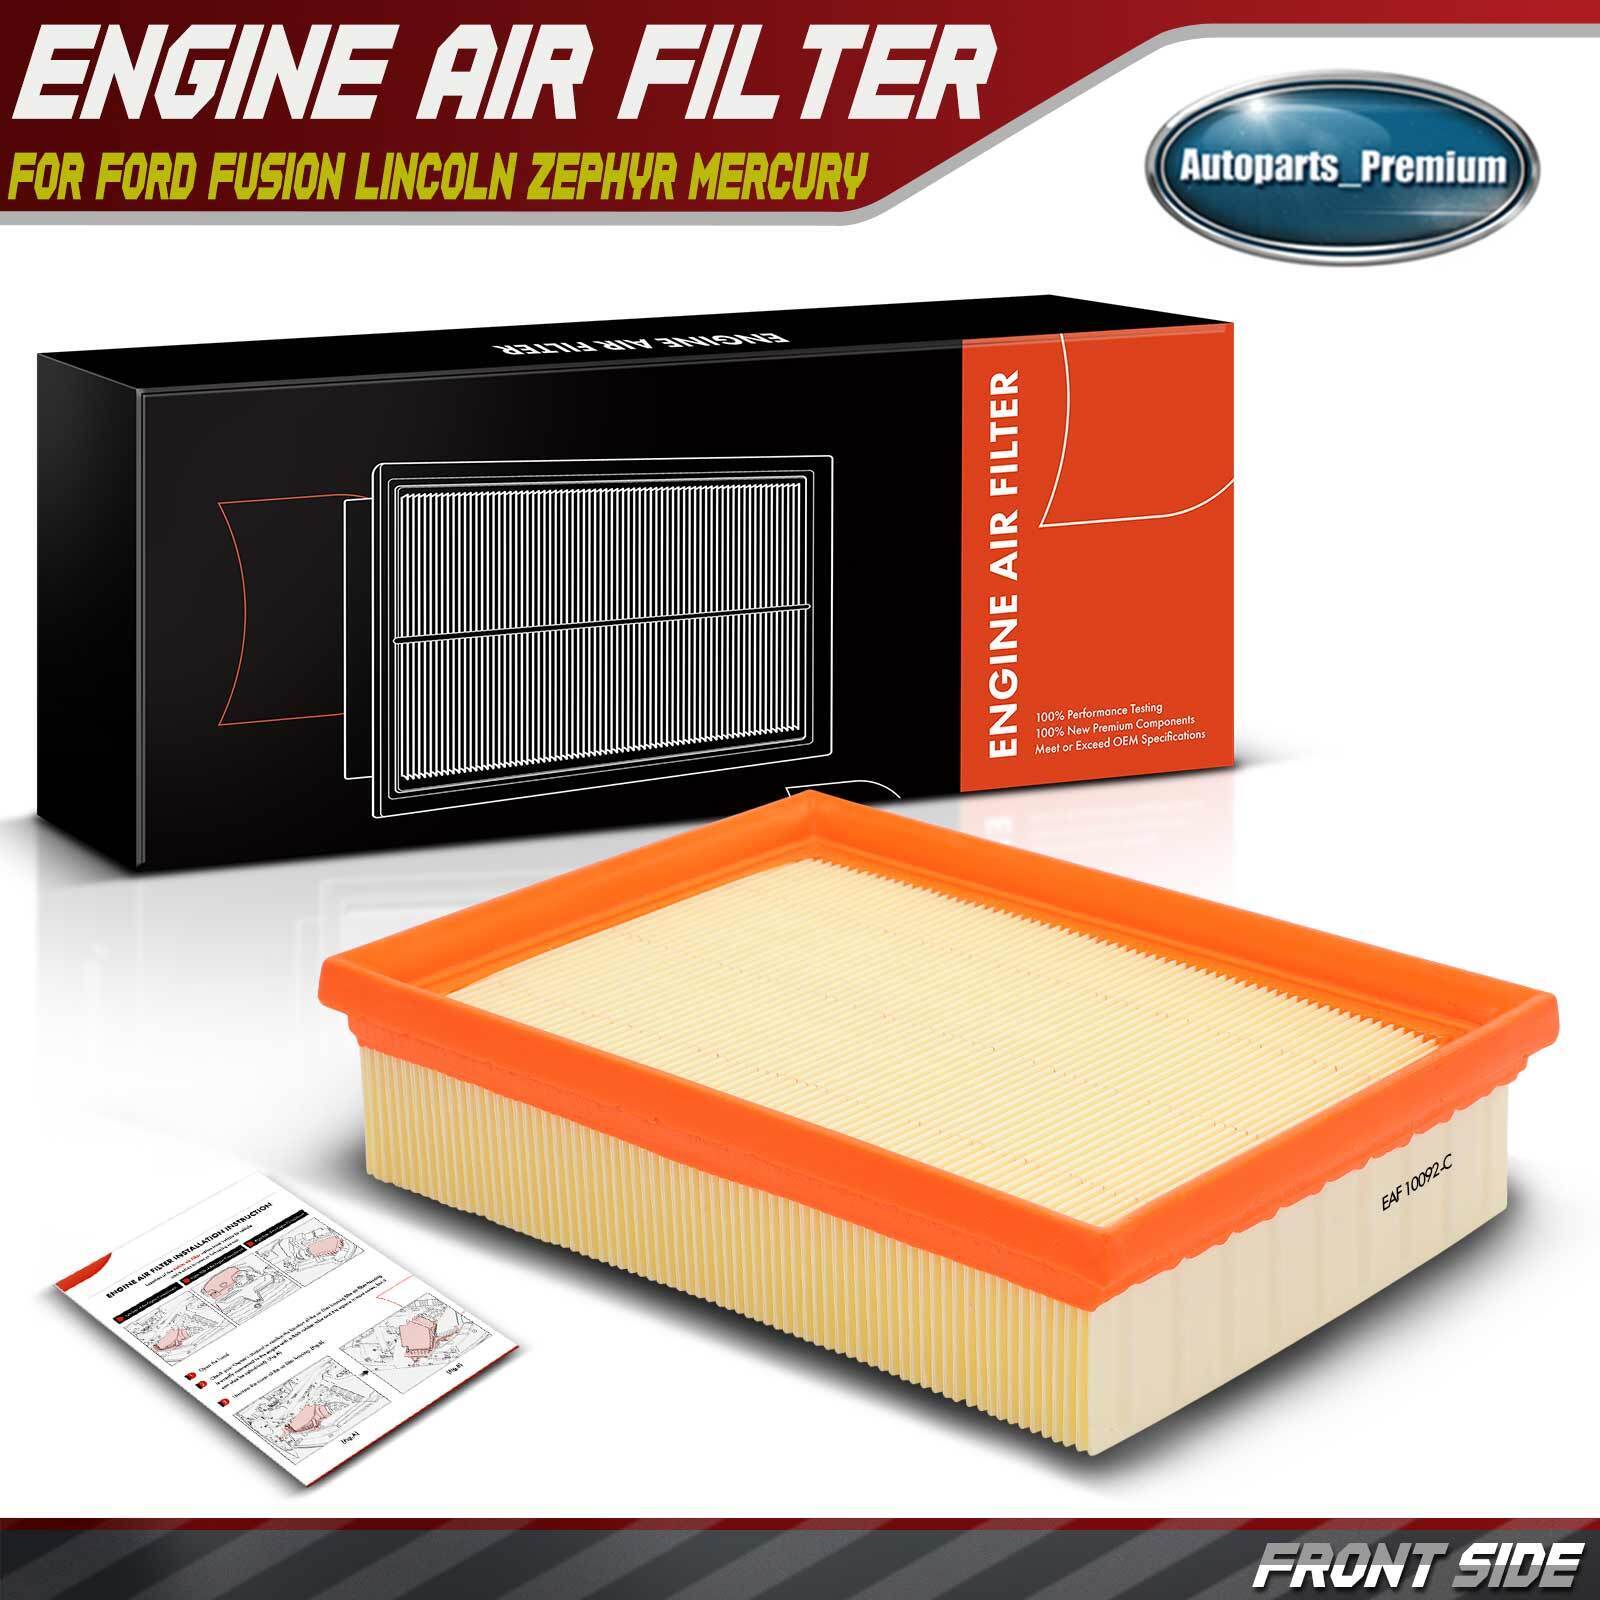 Engine Air Filter for Ford Fusion Lincoln Zephyr Mercury Milan V6 3.0L Flexible